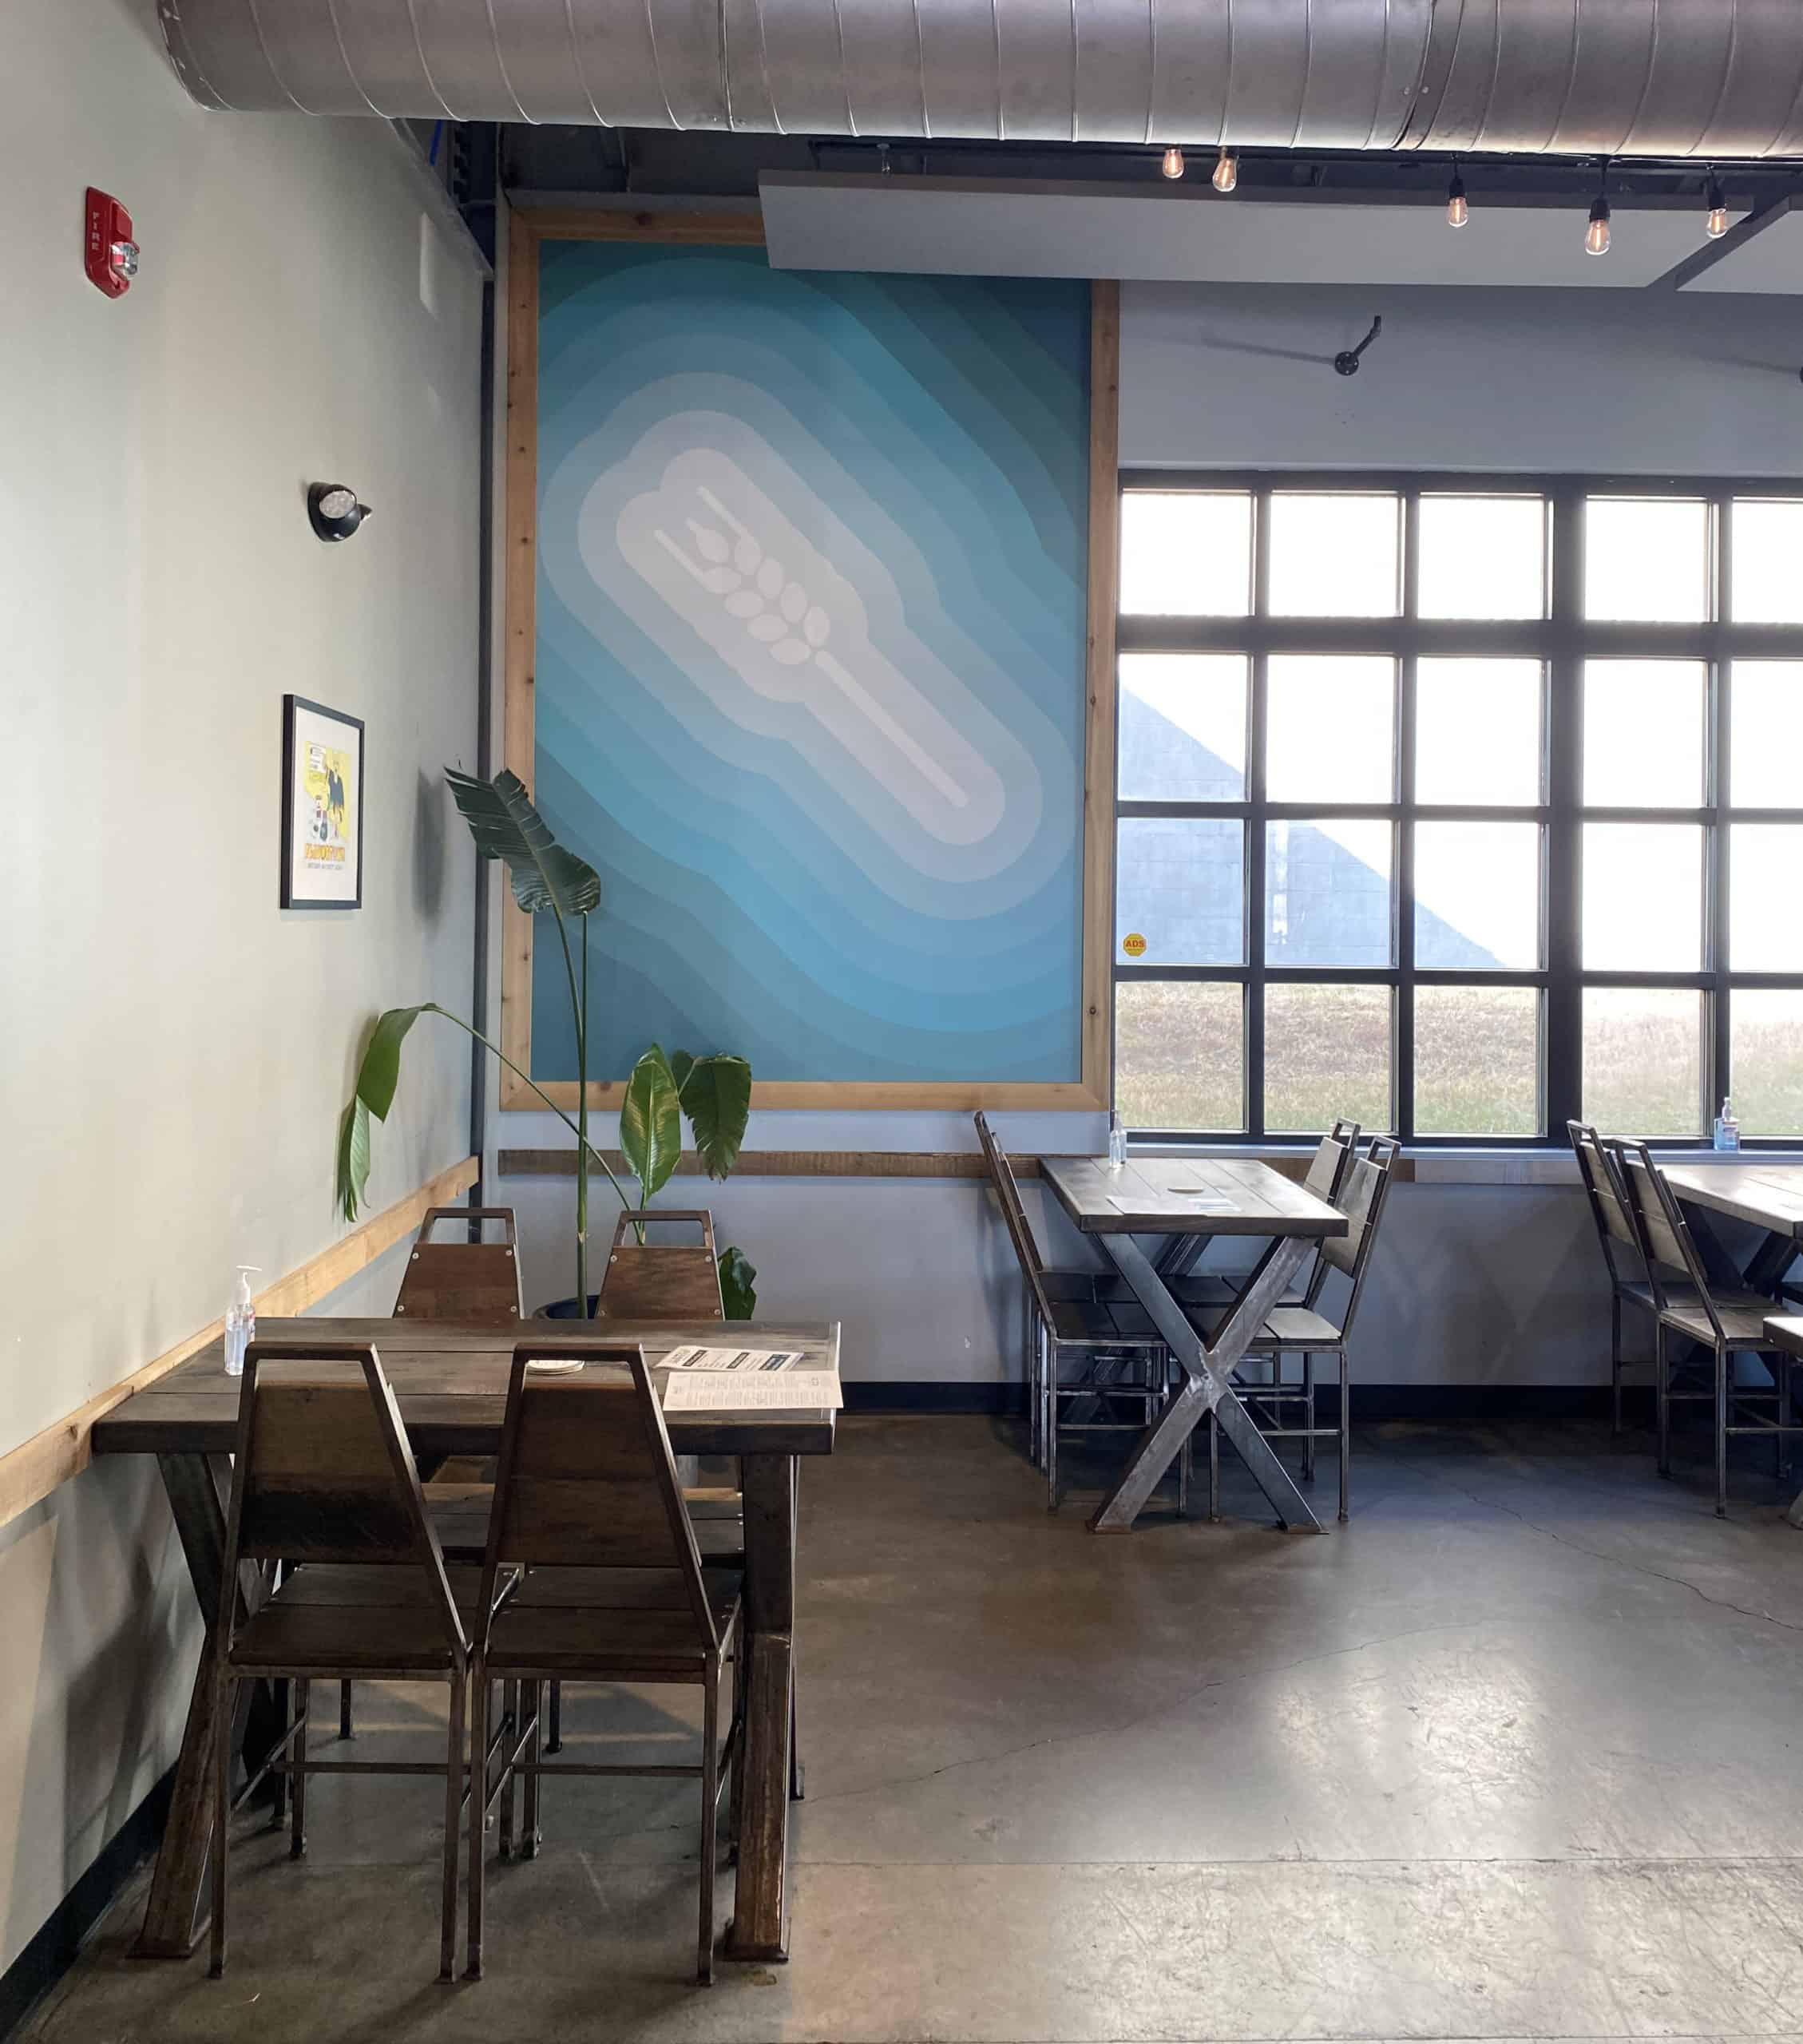 Southern Grist Nations interior